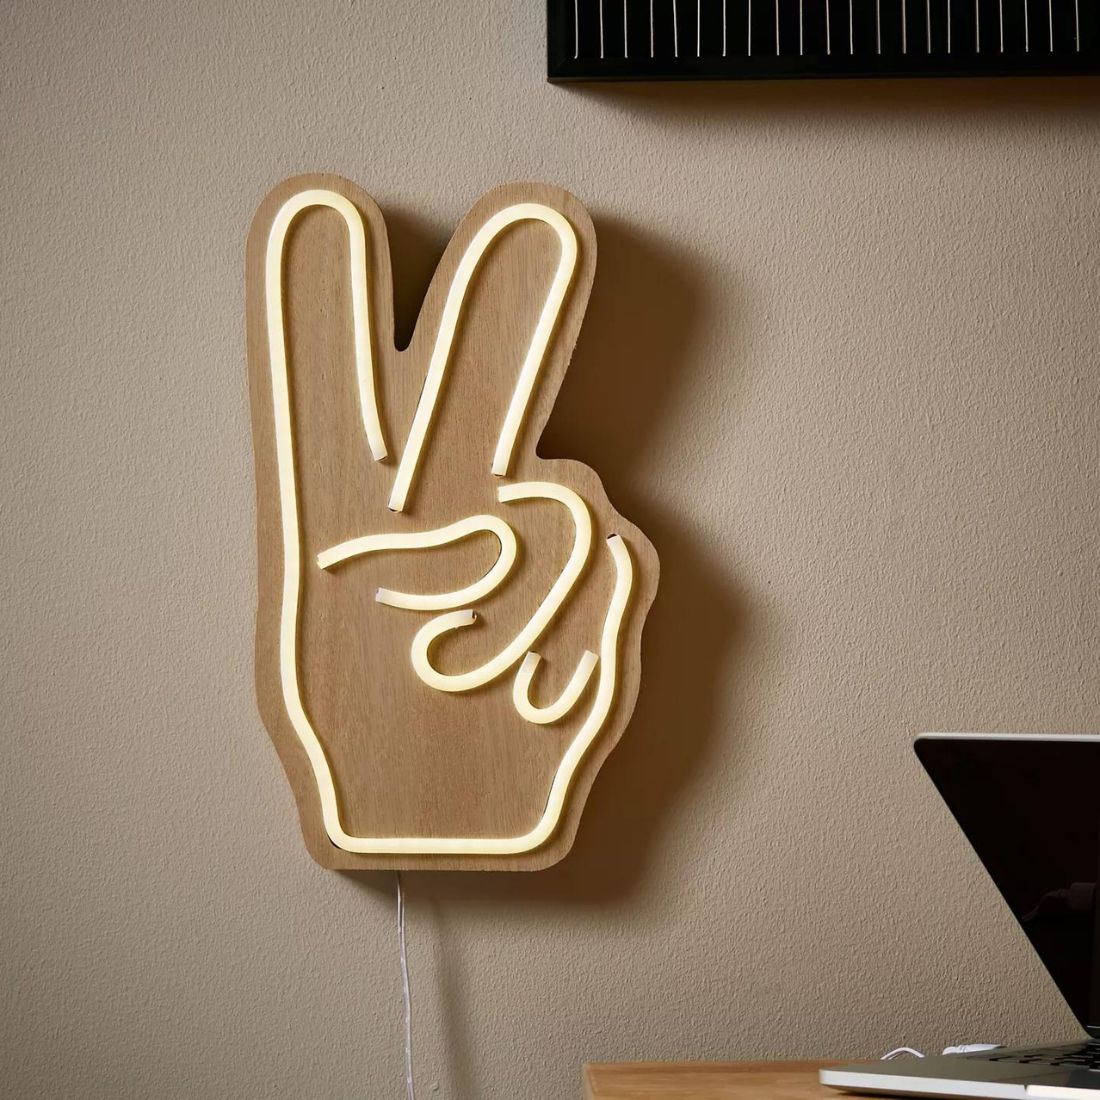 Peace Neon Light with Wooden Base